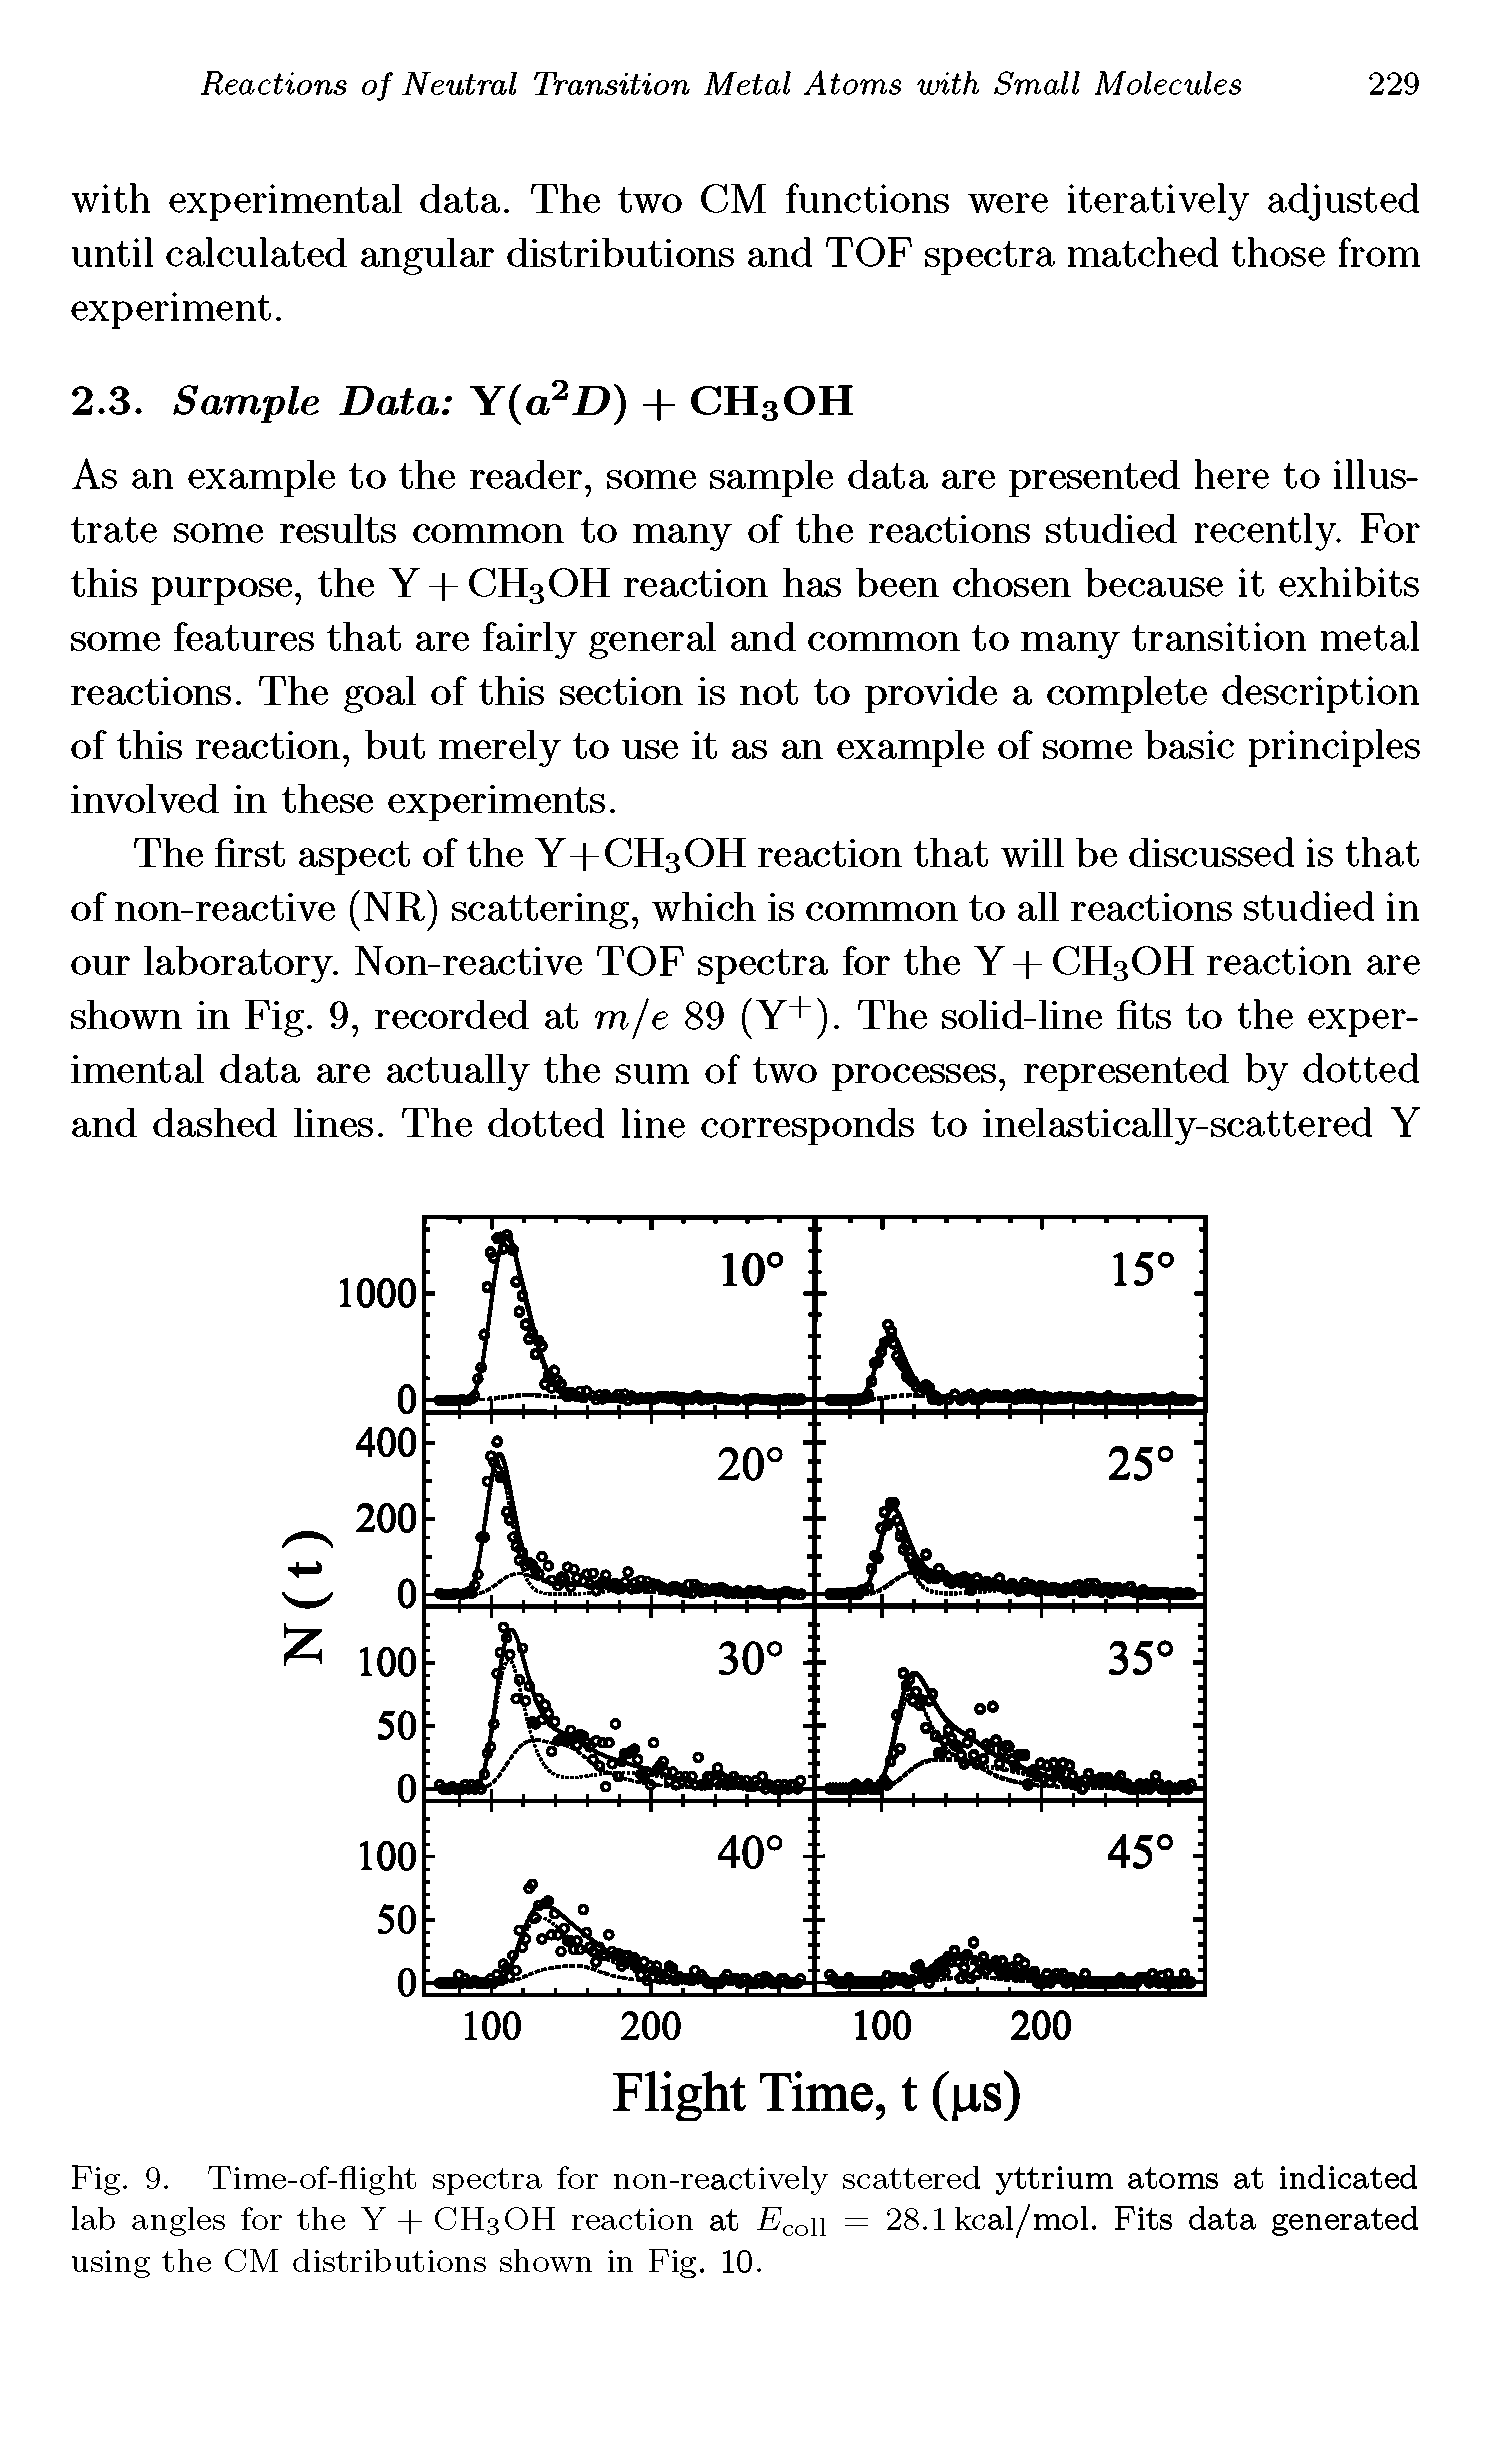 Fig. 9. Time-of-flight spectra for non-reactively scattered yttrium atoms at indicated lab angles for the Y + CH3OH reaction at Eco = 28.1 kcal/mol. Fits data generated using the CM distributions shown in Fig. 10.